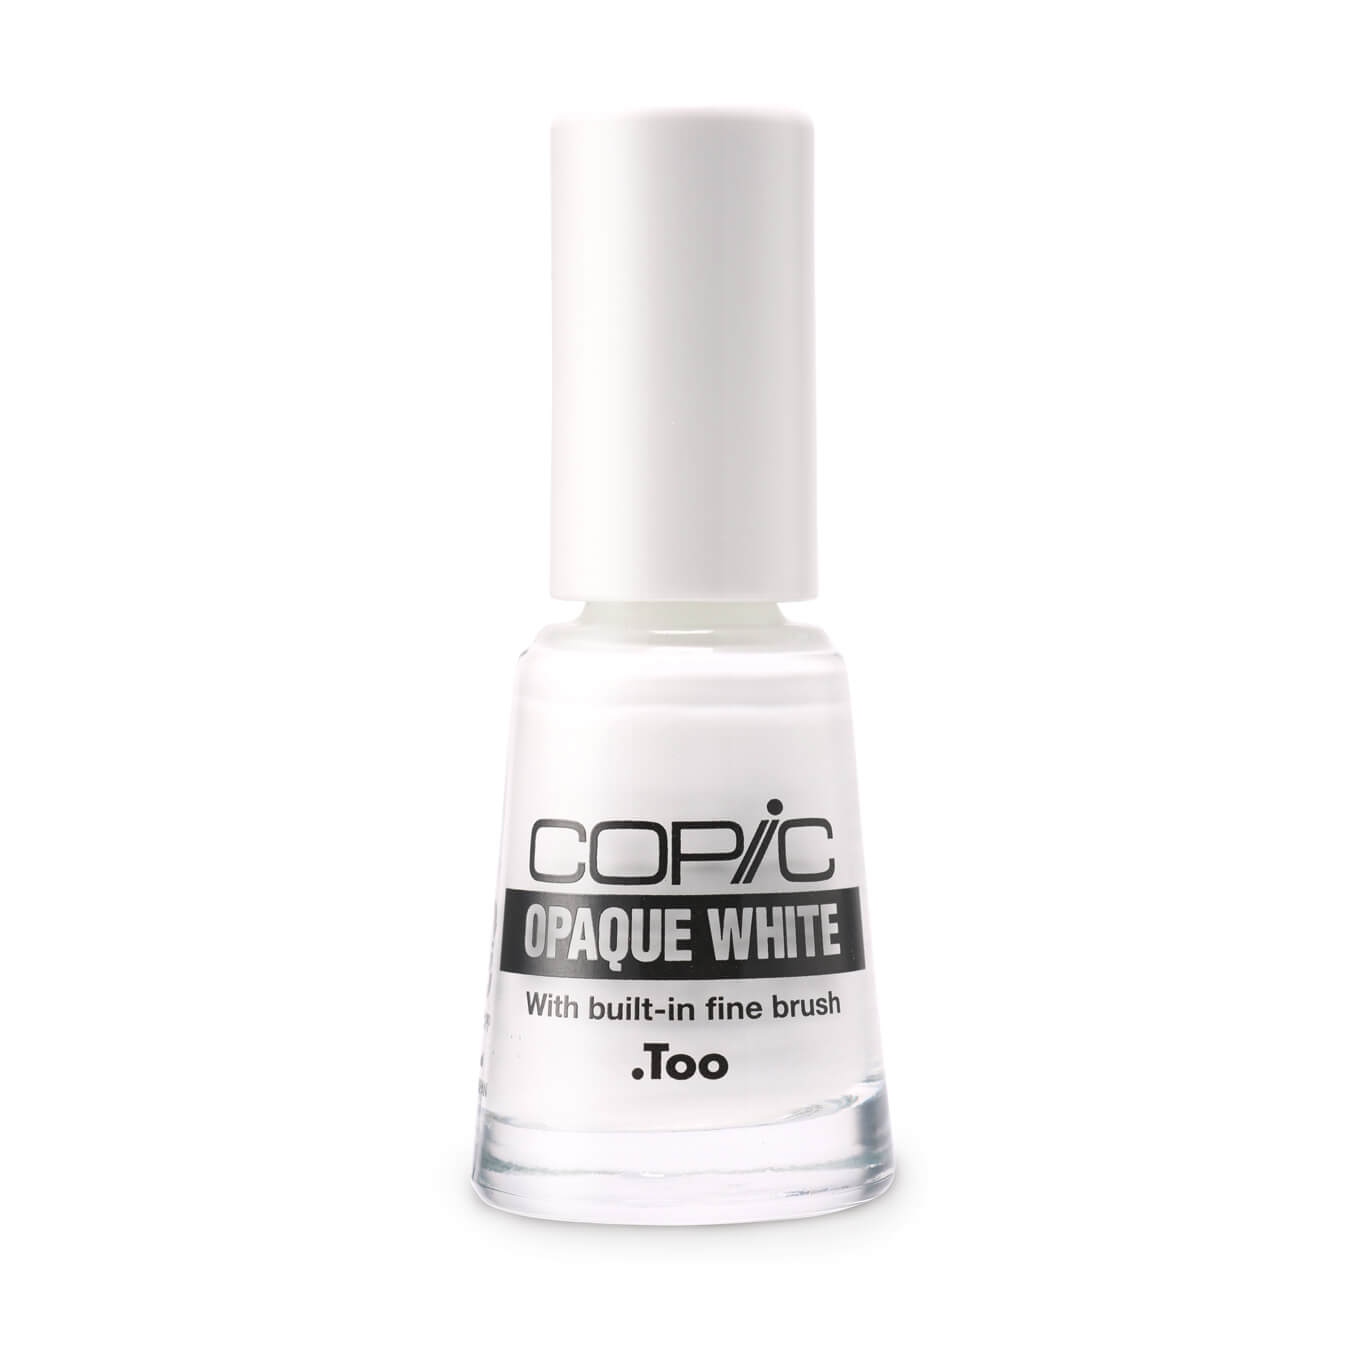 Copic Opaque White (6ml, with a brush)